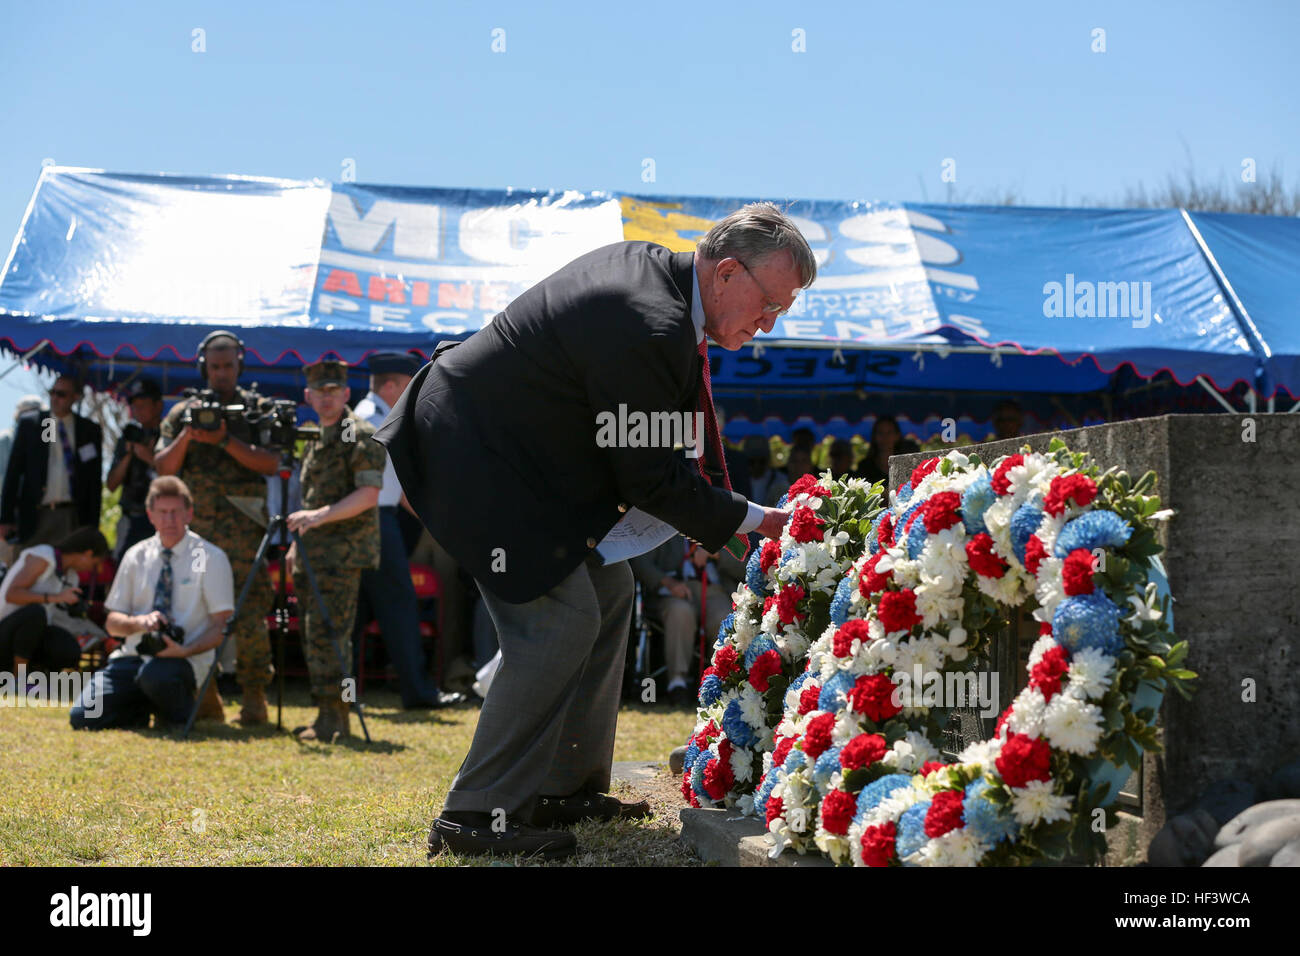 Retired U.S. Marine Corps Col. Warren Wiedhahn, Executive Vice President of the Iwo Jima Association of America, lays a wreath during the 71st Reunion of Honor Ceremony at Iwo To, Japan, March 19, 2016. The Iwo Jima Reunion of Honor is an opportunity for Japanese and U.S. veterans and their families, dignitaries, leaders and service members from both nations to honor the battle while recognizing 71 years of peace and prosperity in the U.S. – Japanese alliance. (U.S. Marine Corps photo by MCIPAC Combat Camera Lance Cpl. Juan Esqueda / Released) Iwo Jima 71st Reunion of Honor 160319-M-JD520-221 Stock Photo